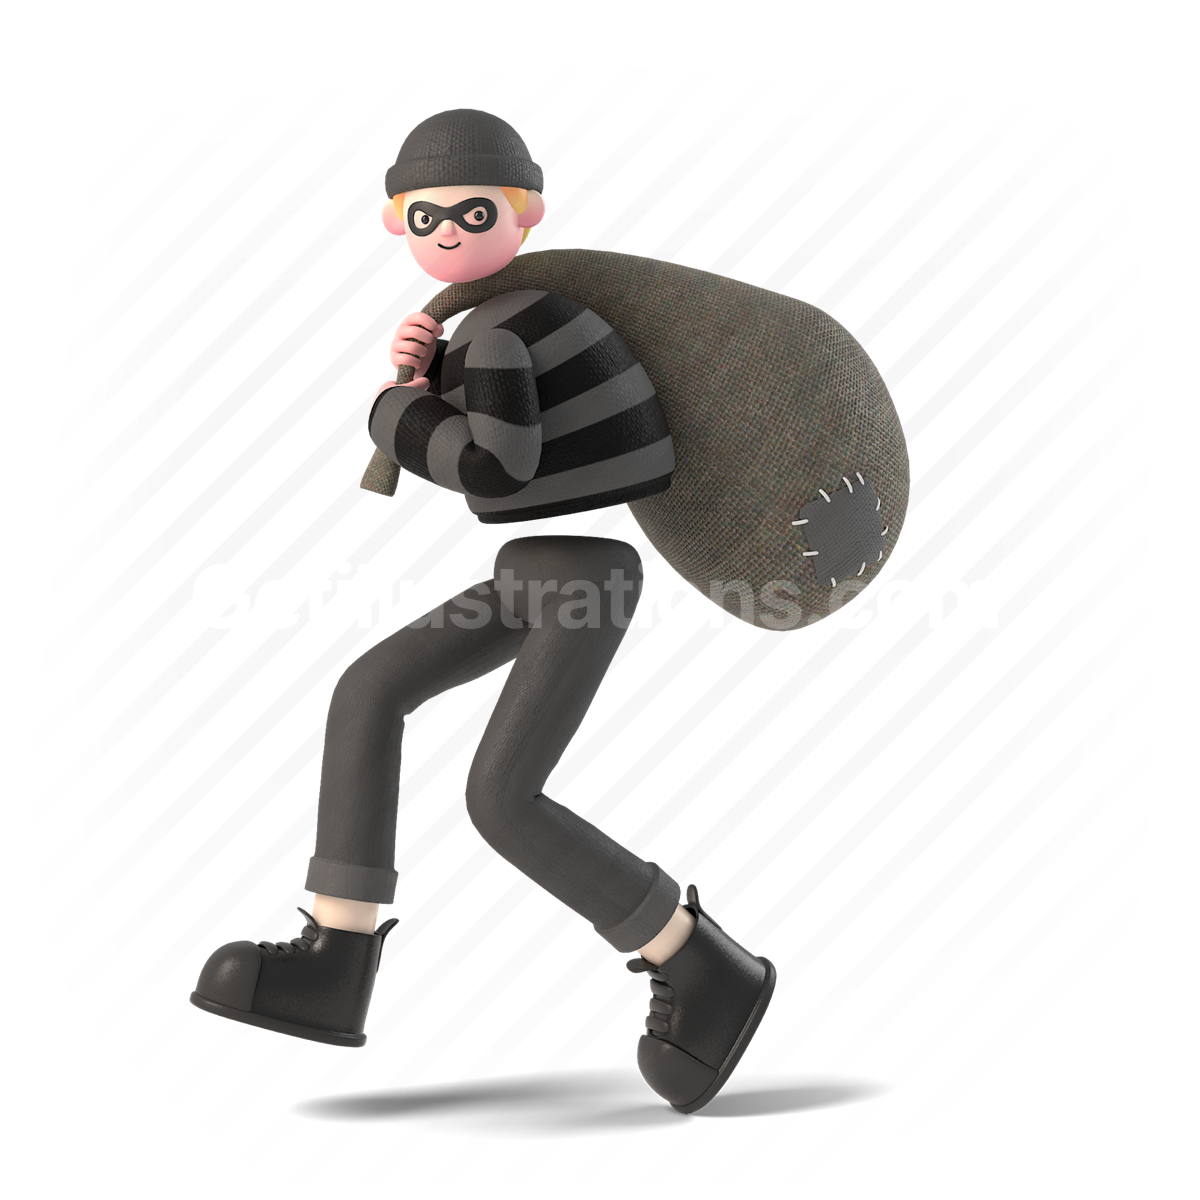 3d, people, person, character, burglar, thief, steal, criminal, crime